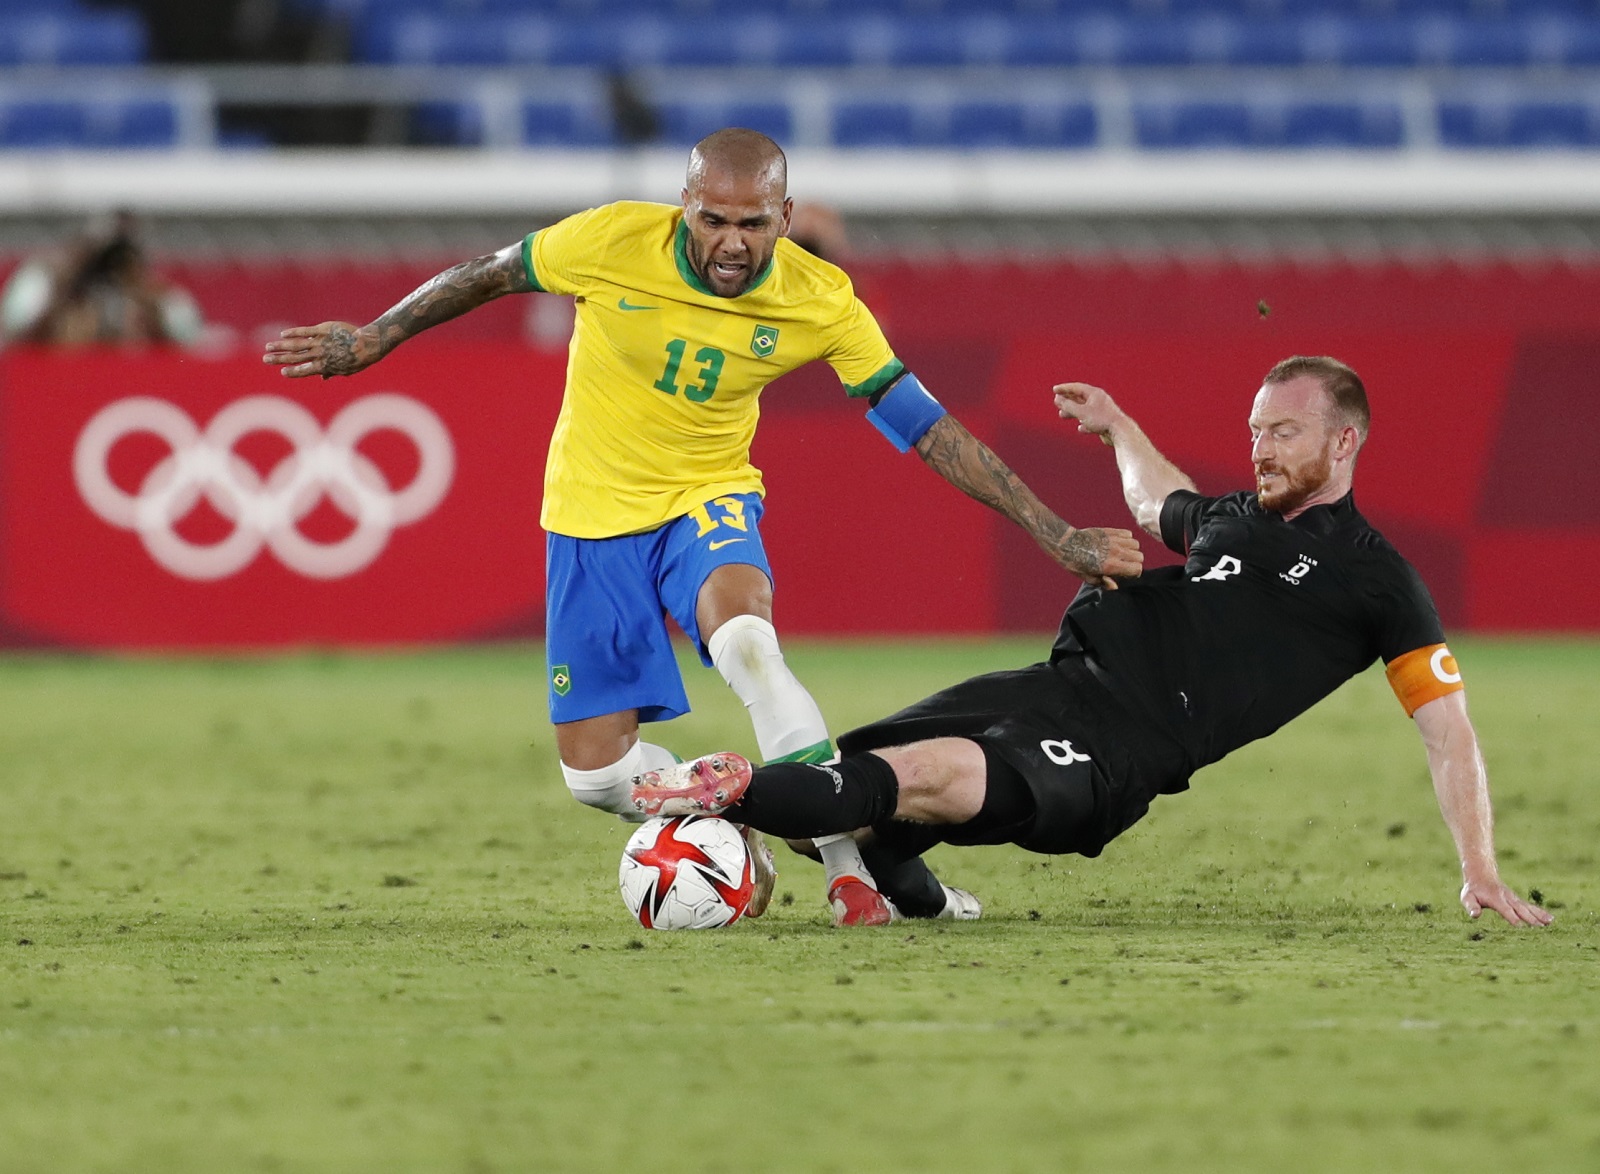 epa09358120 Dani Alves (L) of Brazil in action against Maximillian Arnold (R) of Germany during the men's soccer group stage match between Germany and Brazil at the Tokyo 2020 Olympic Games in Yokohama, Japan, 22 July 2021.  EPA/KIYOSHI OTA